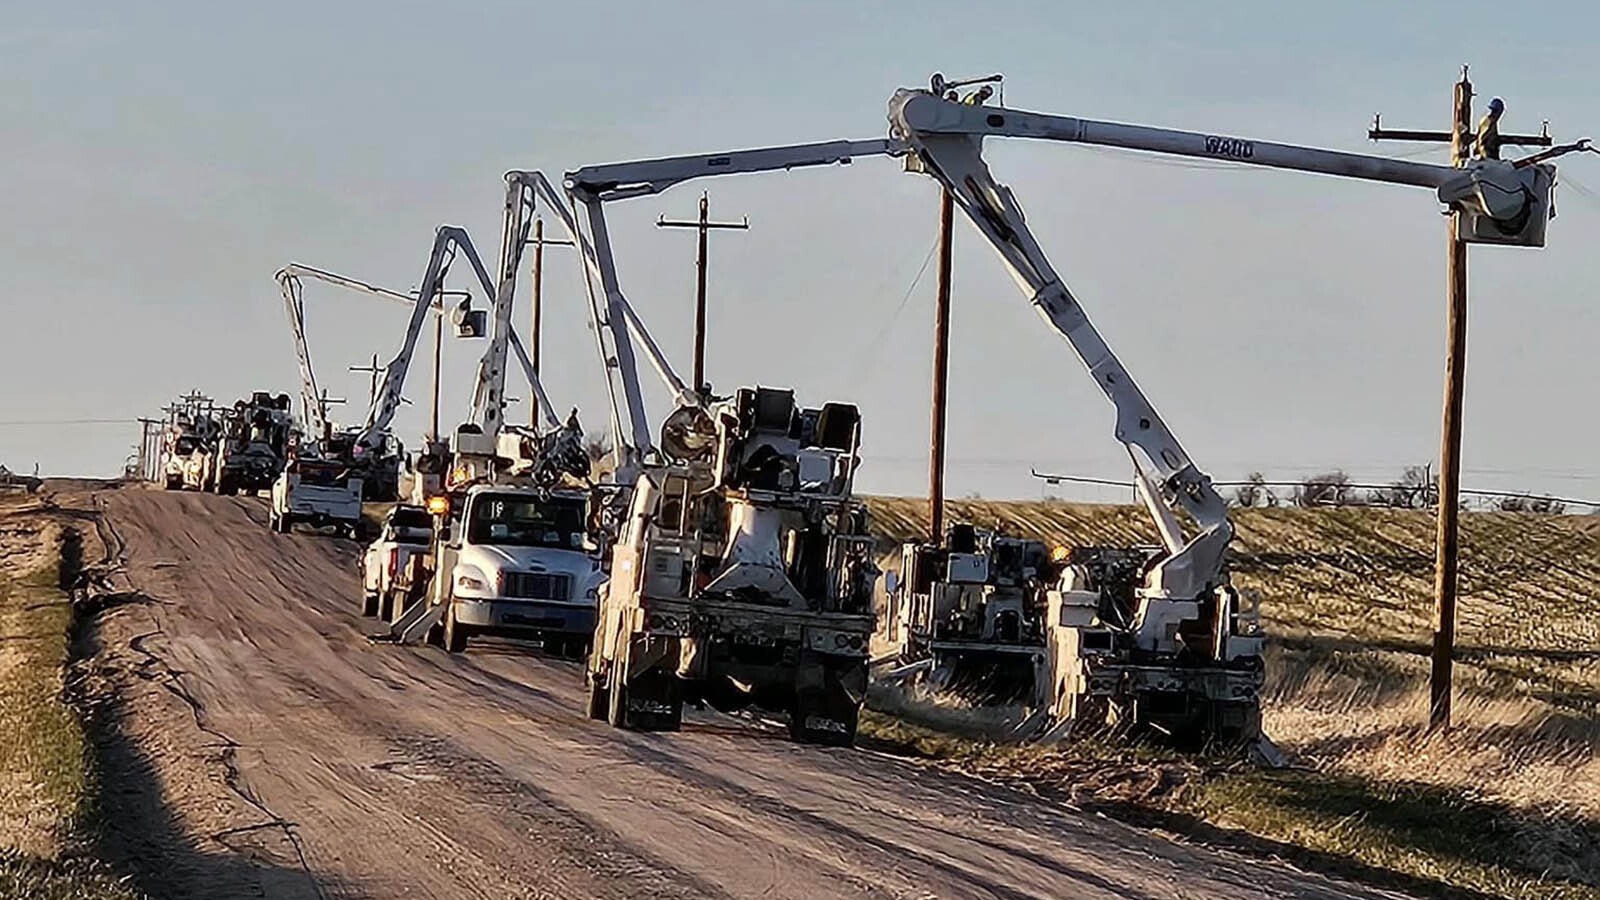 High West Energy in Pine Bluffs, Wyoming, has spent nearly two weeks repairing hundreds of power poles downed by a strong spring snowstorm across eastern Wyoming and western Nebraska.